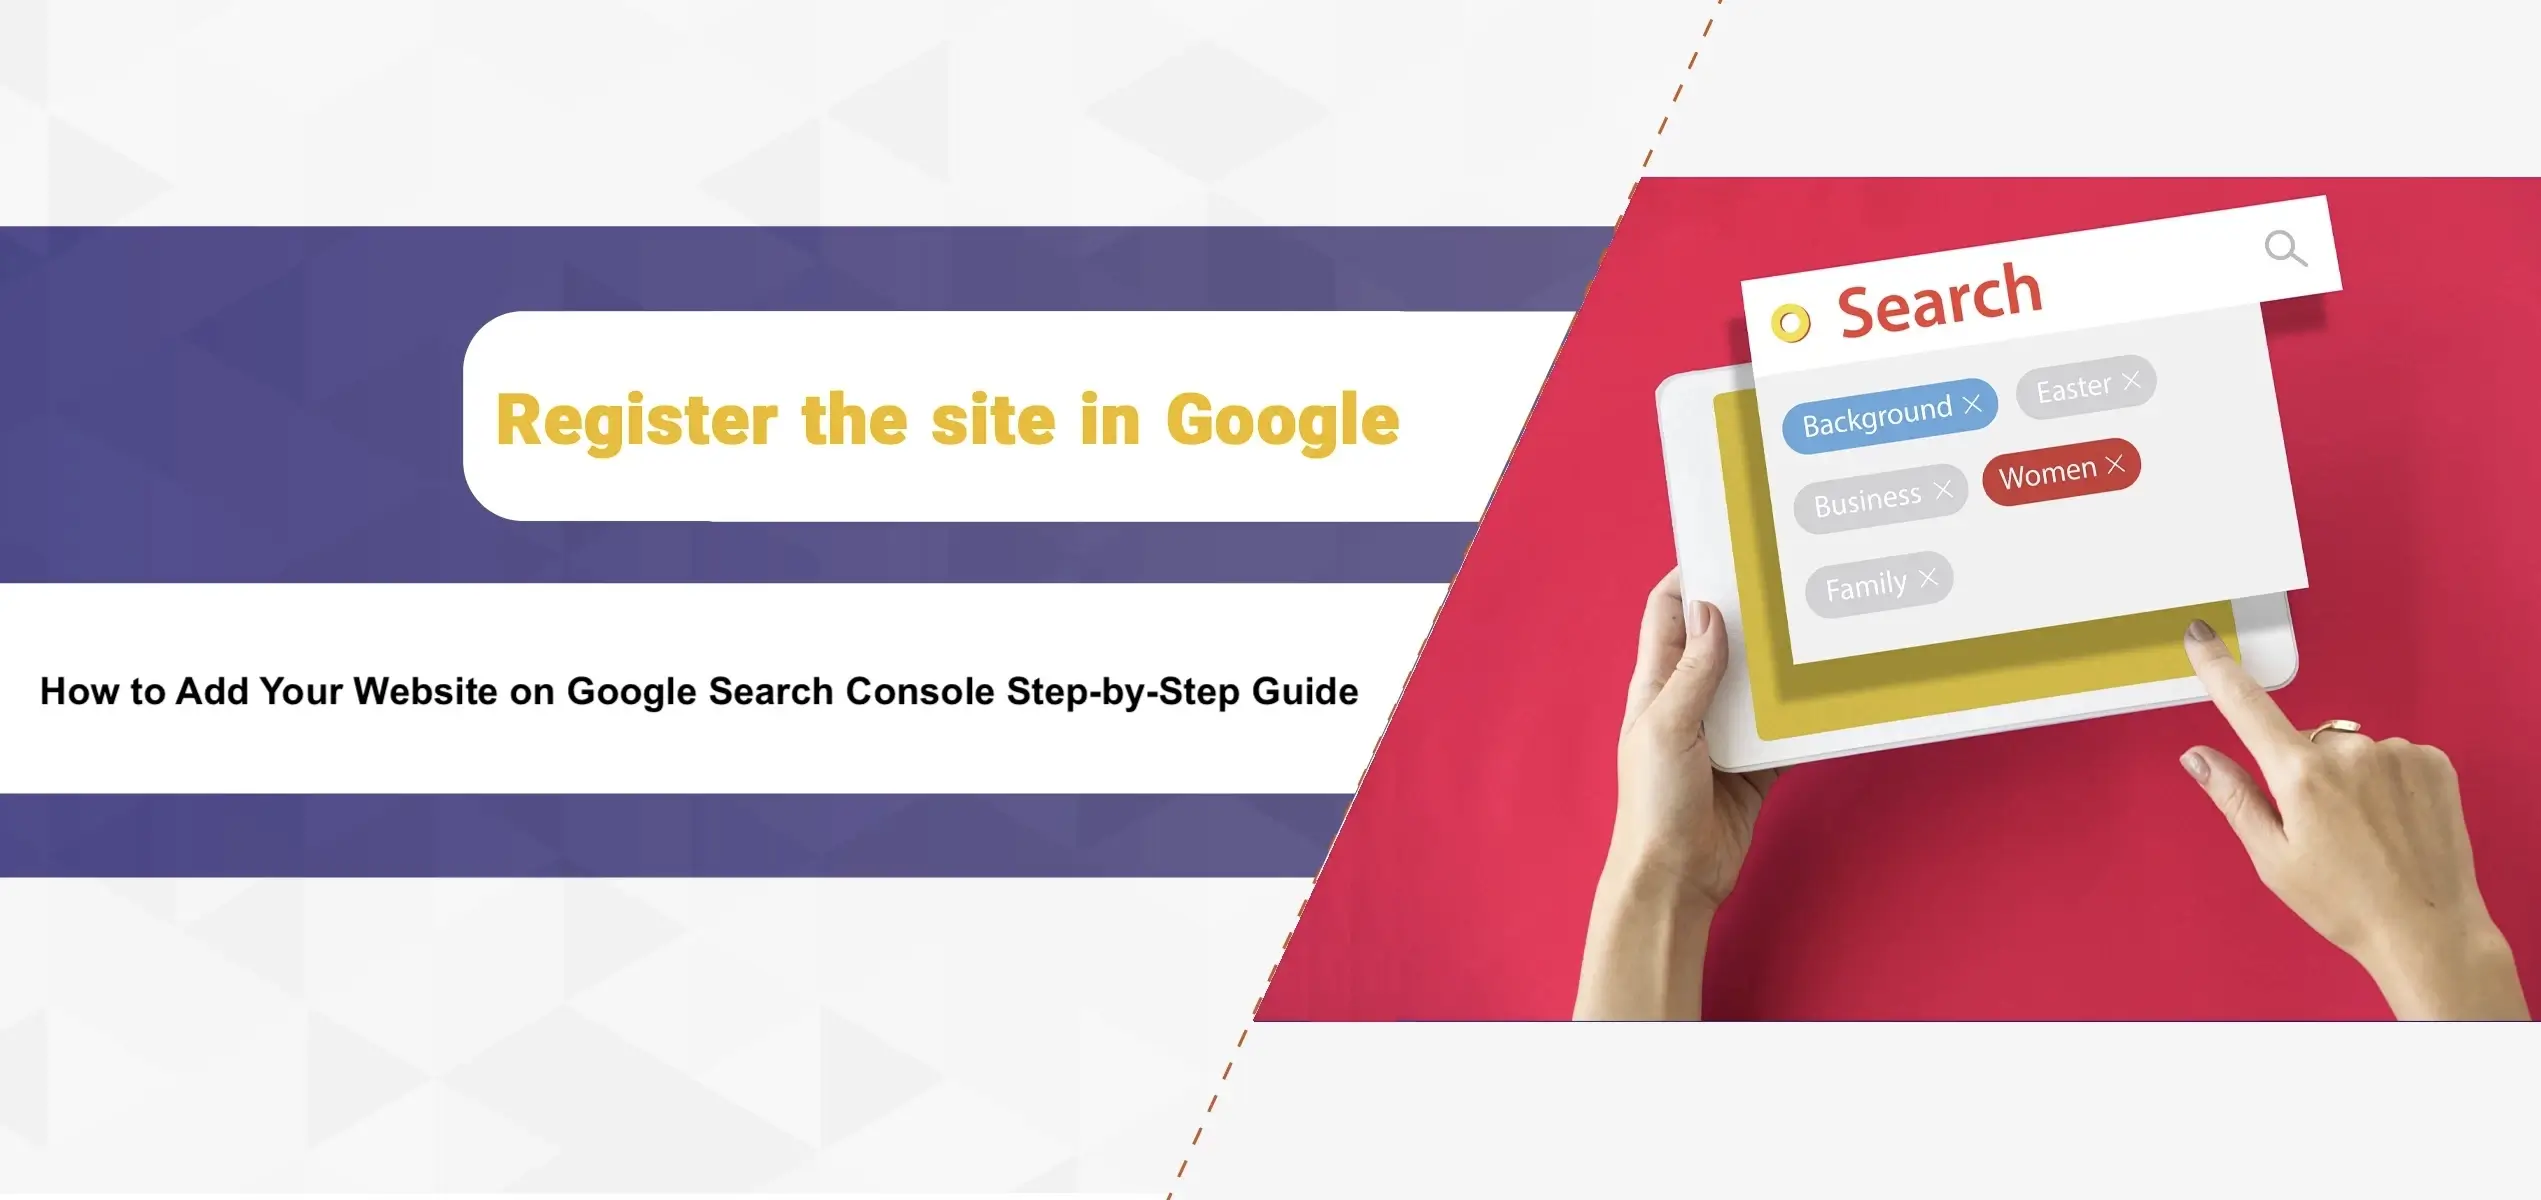 How to Add Your Website on Google Search Console Step-by-Step Guide